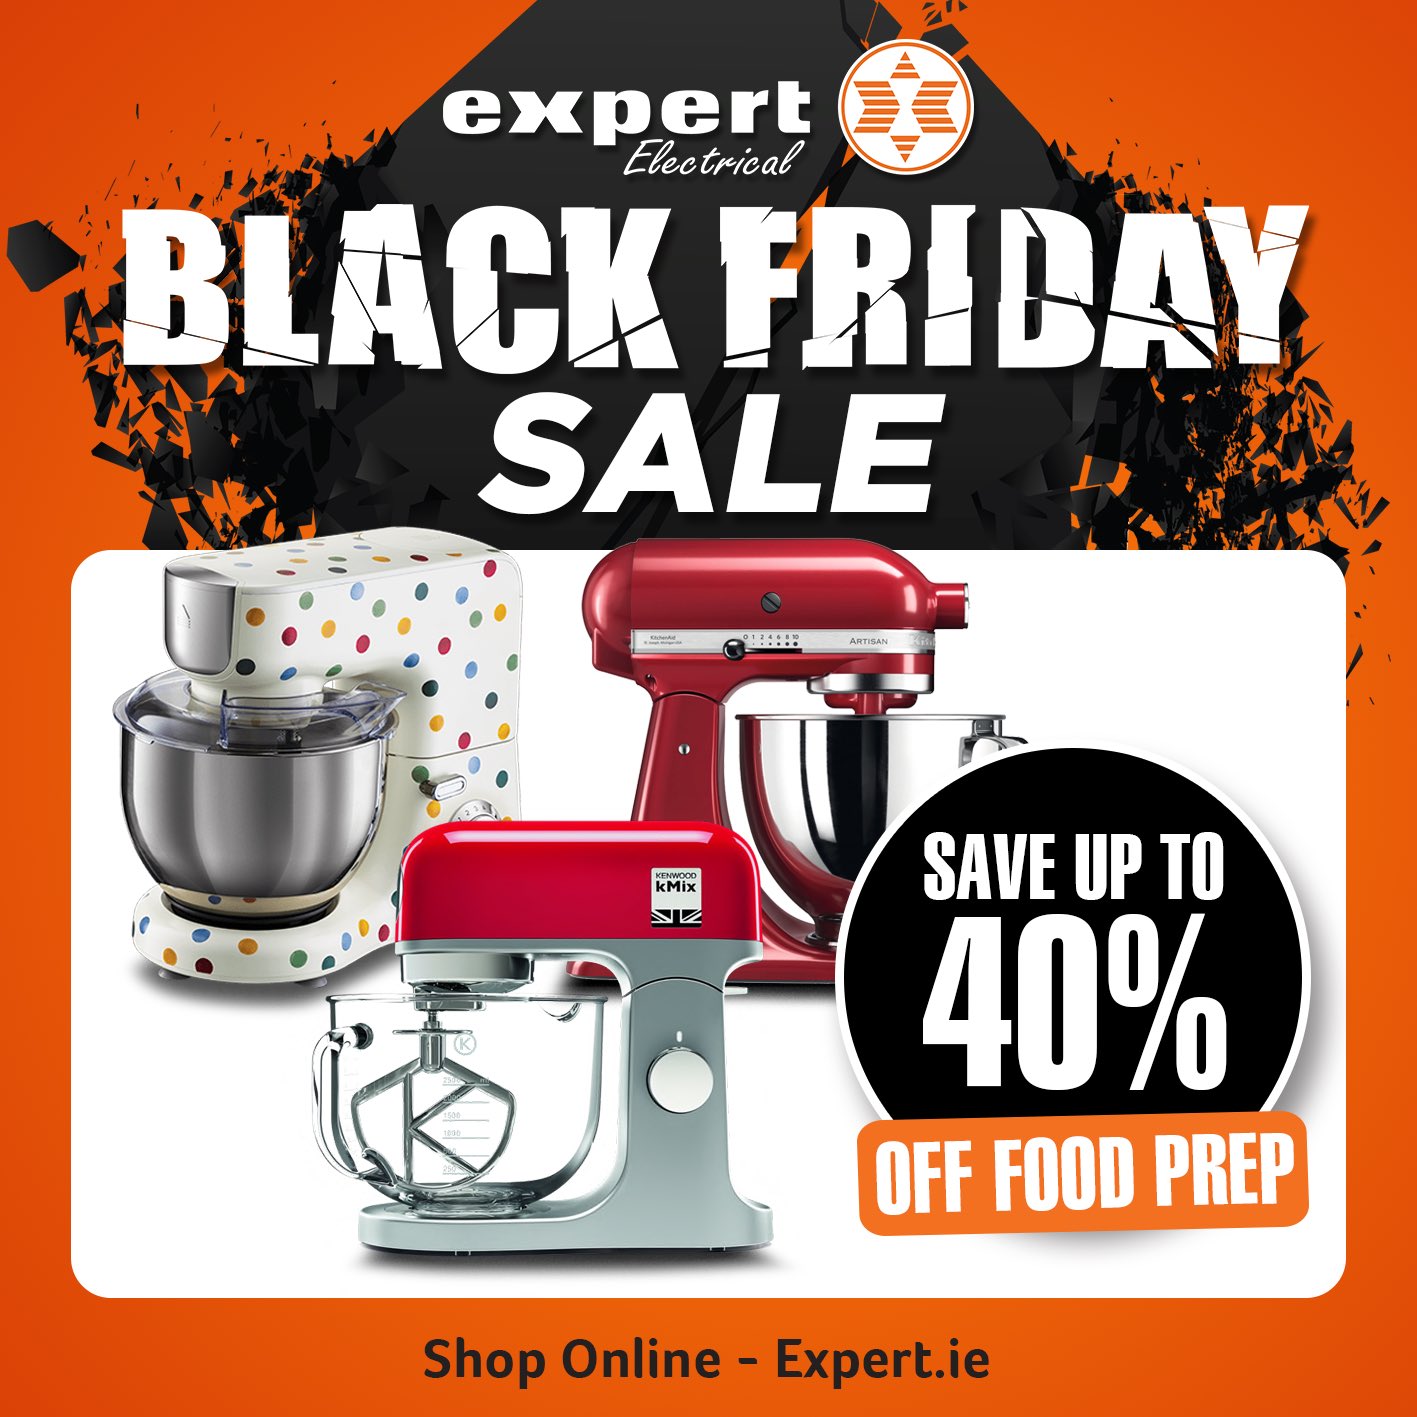 Upgrade your kitchen equipment with Black Friday deals